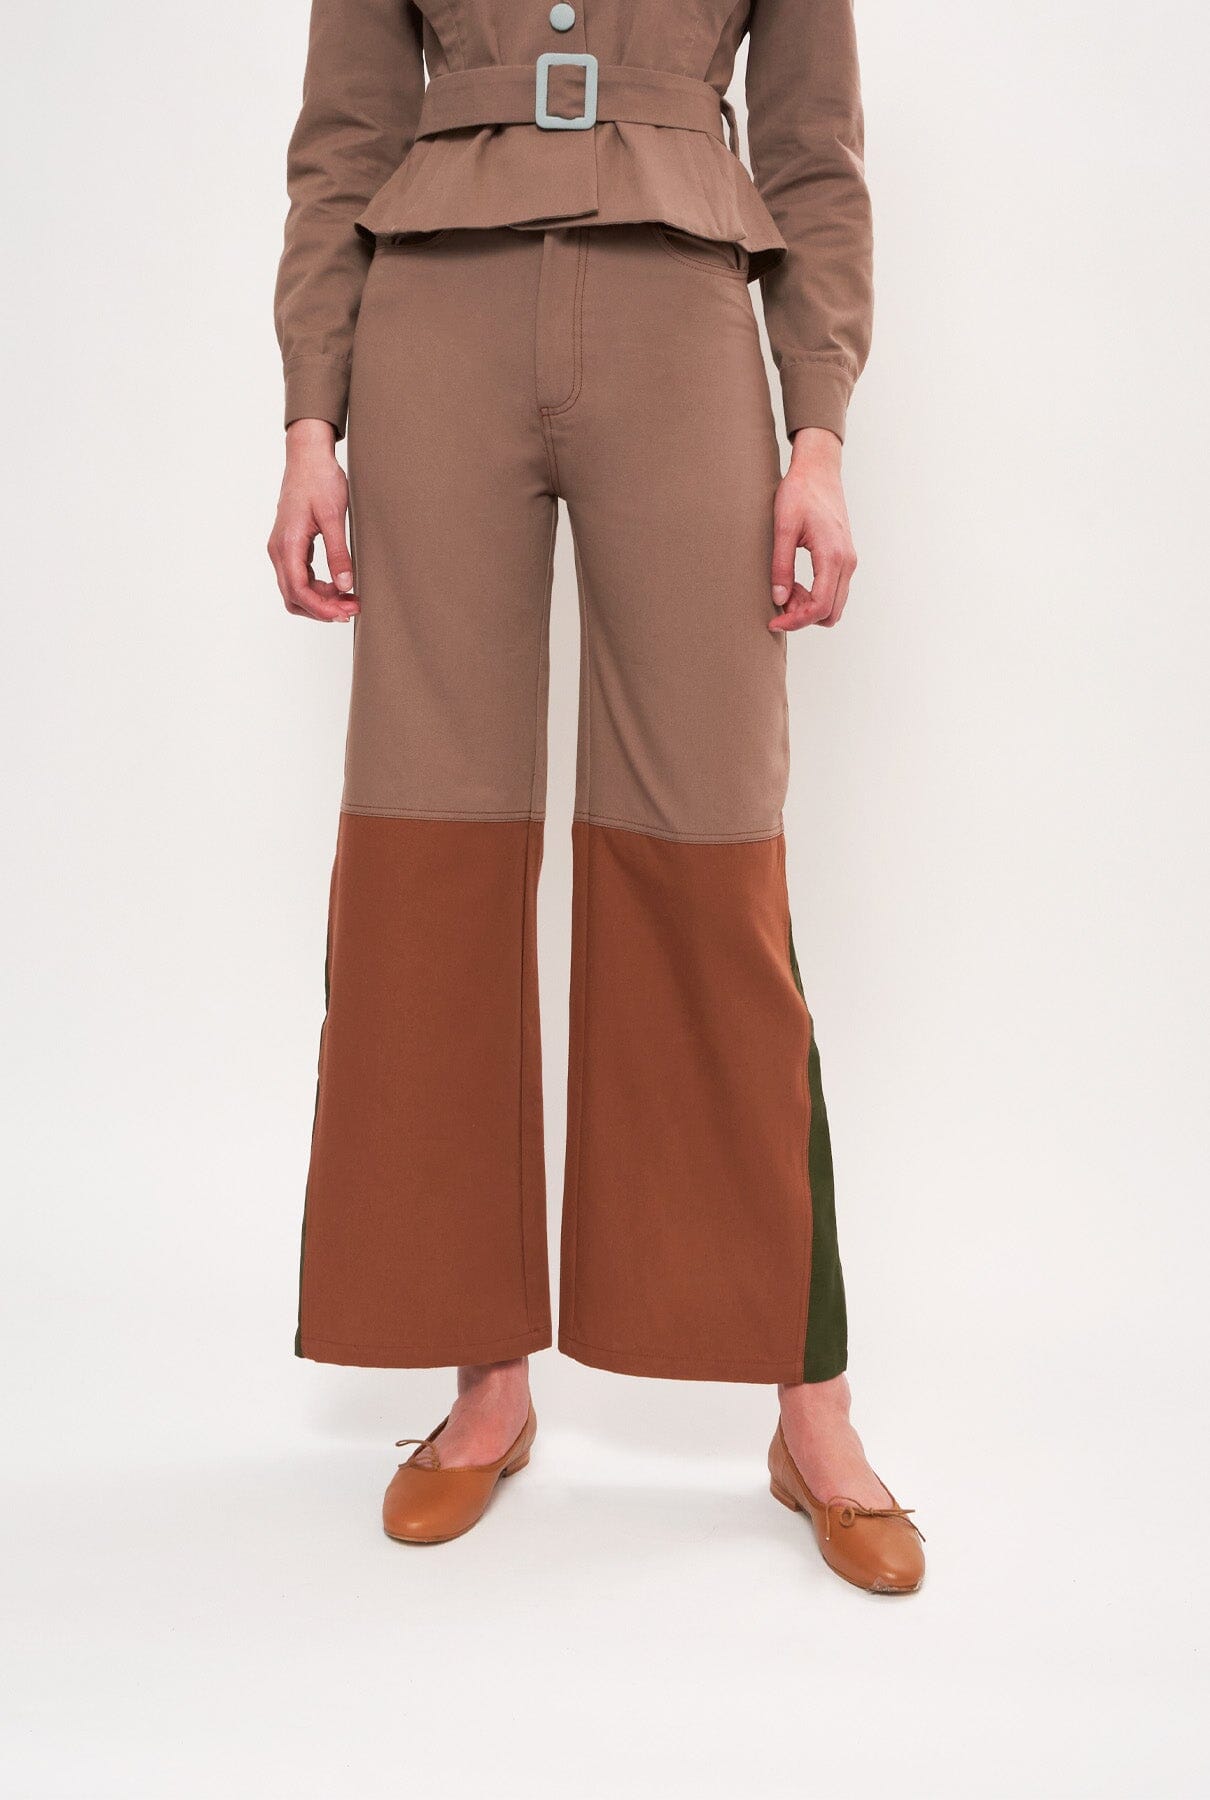 Coro Browns Trousers Julise Magon 